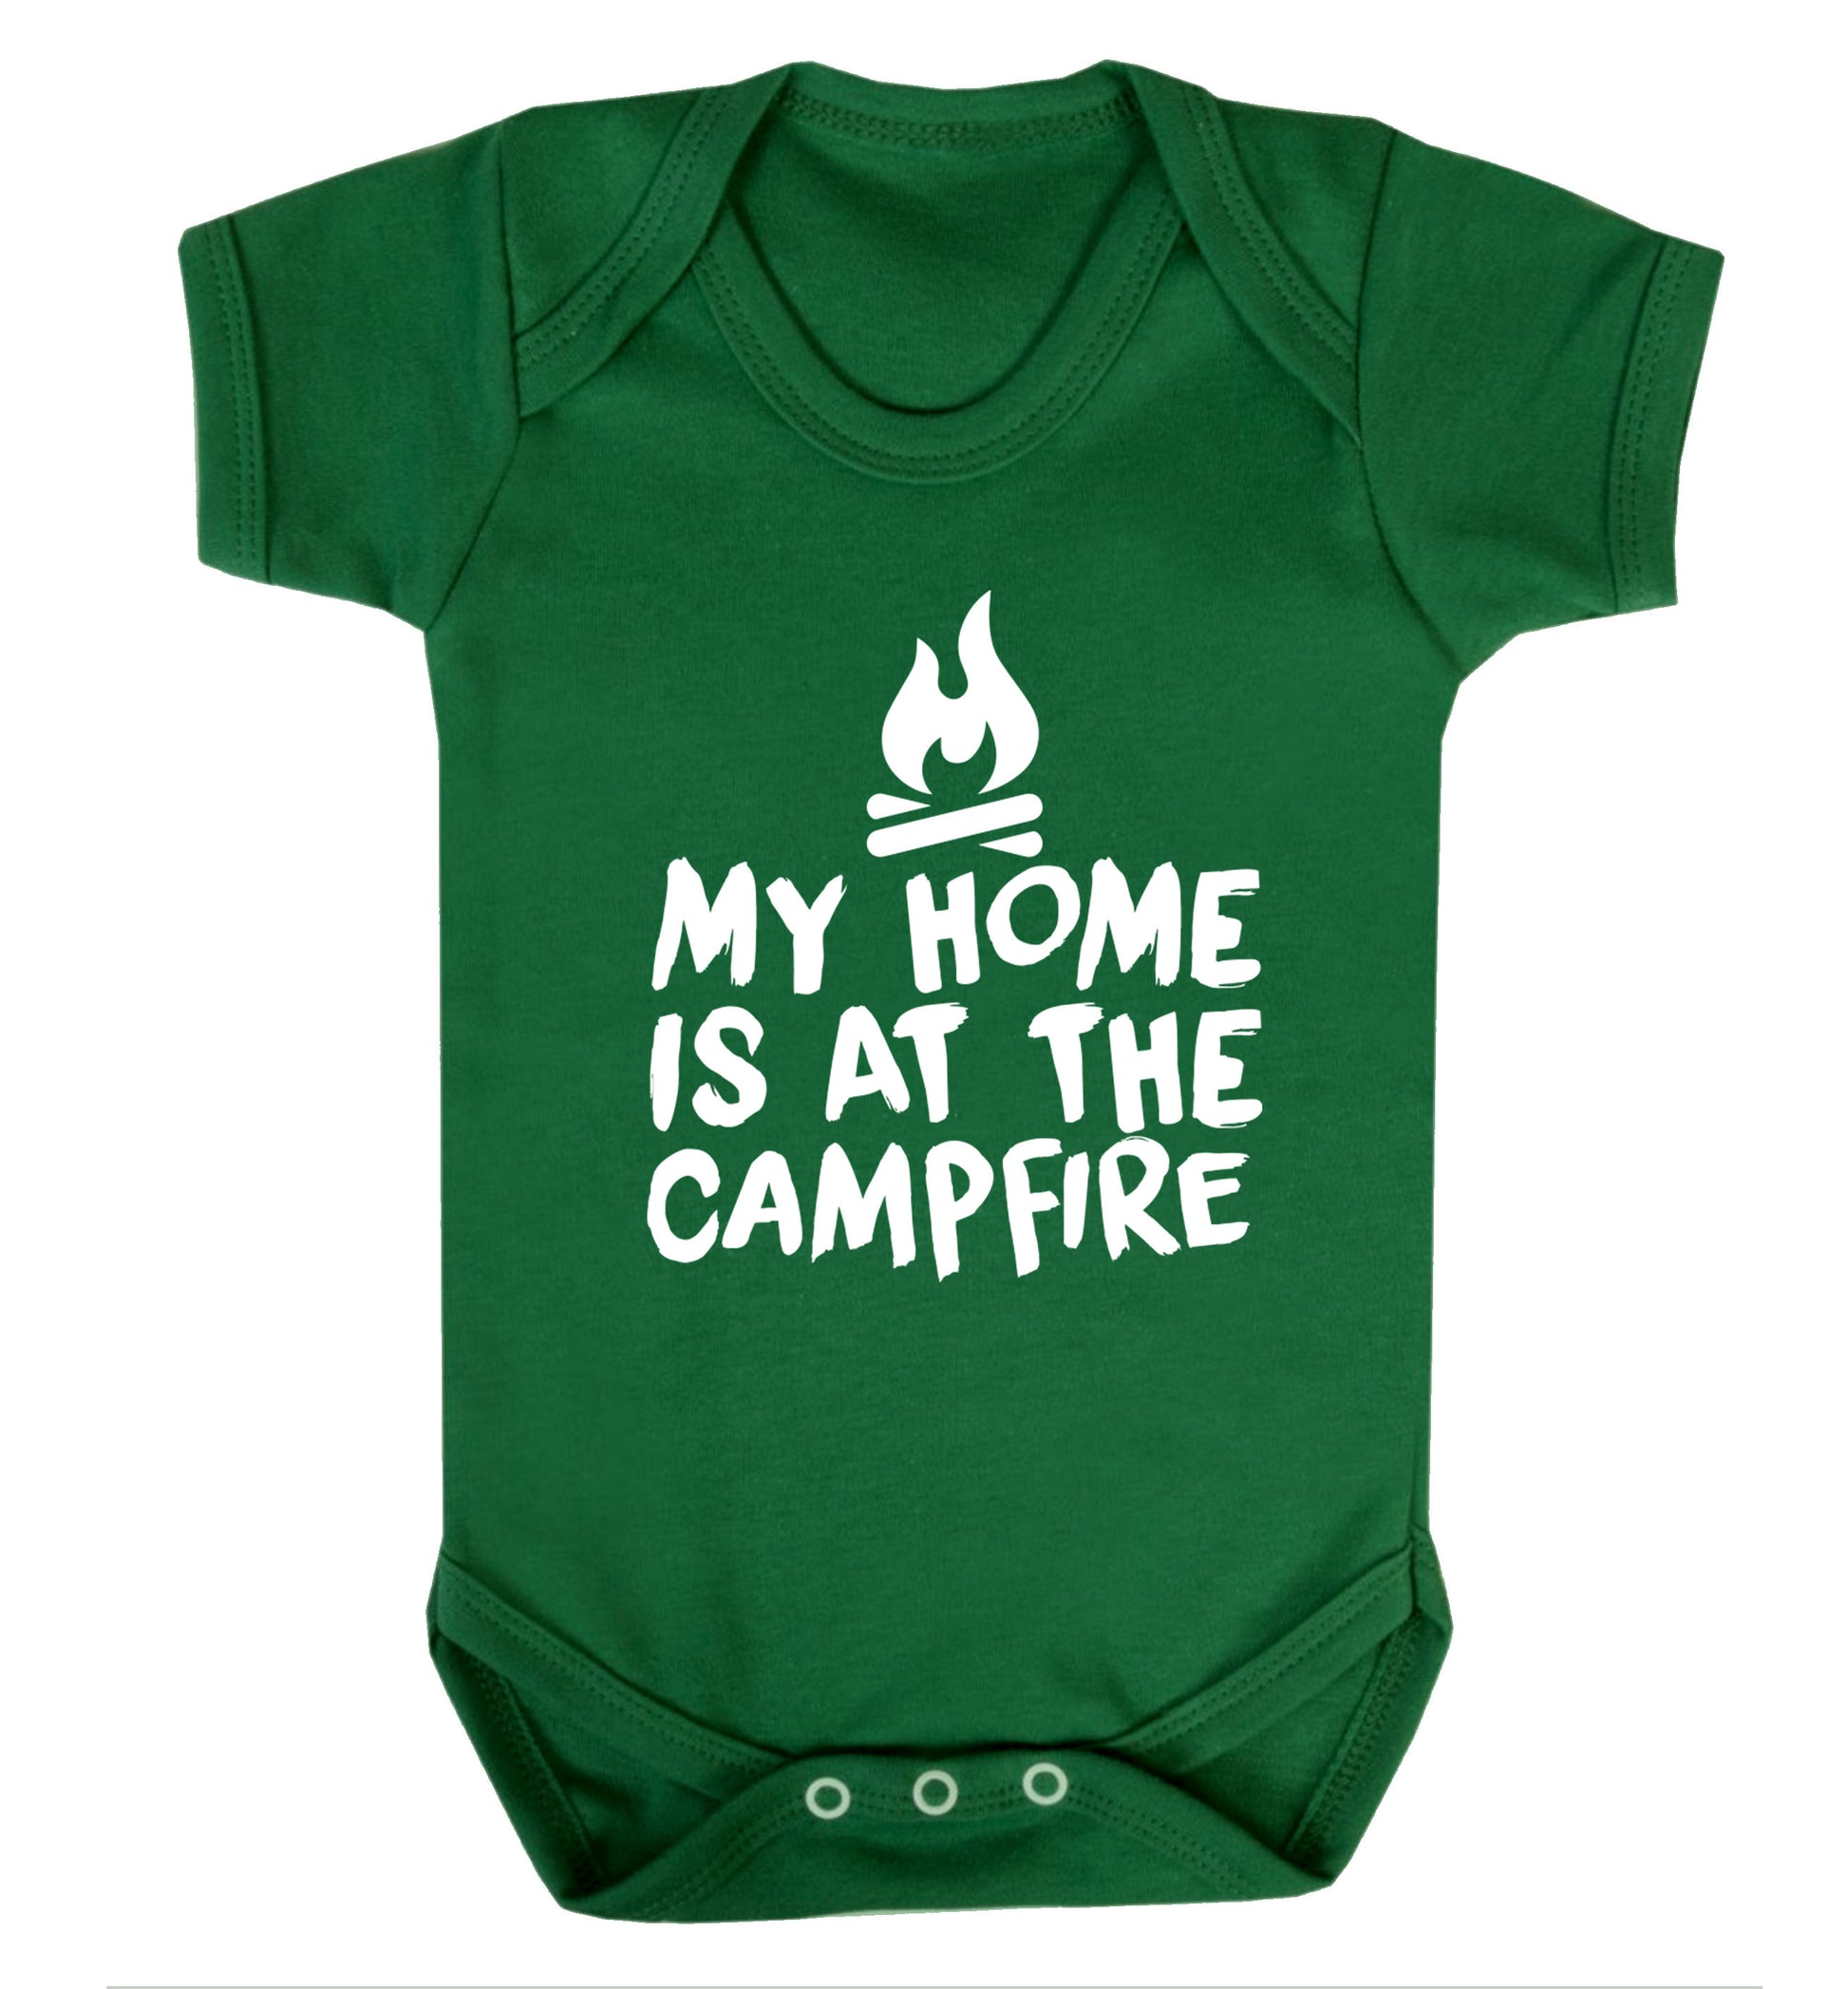 My home is at the campfire Baby Vest green 18-24 months